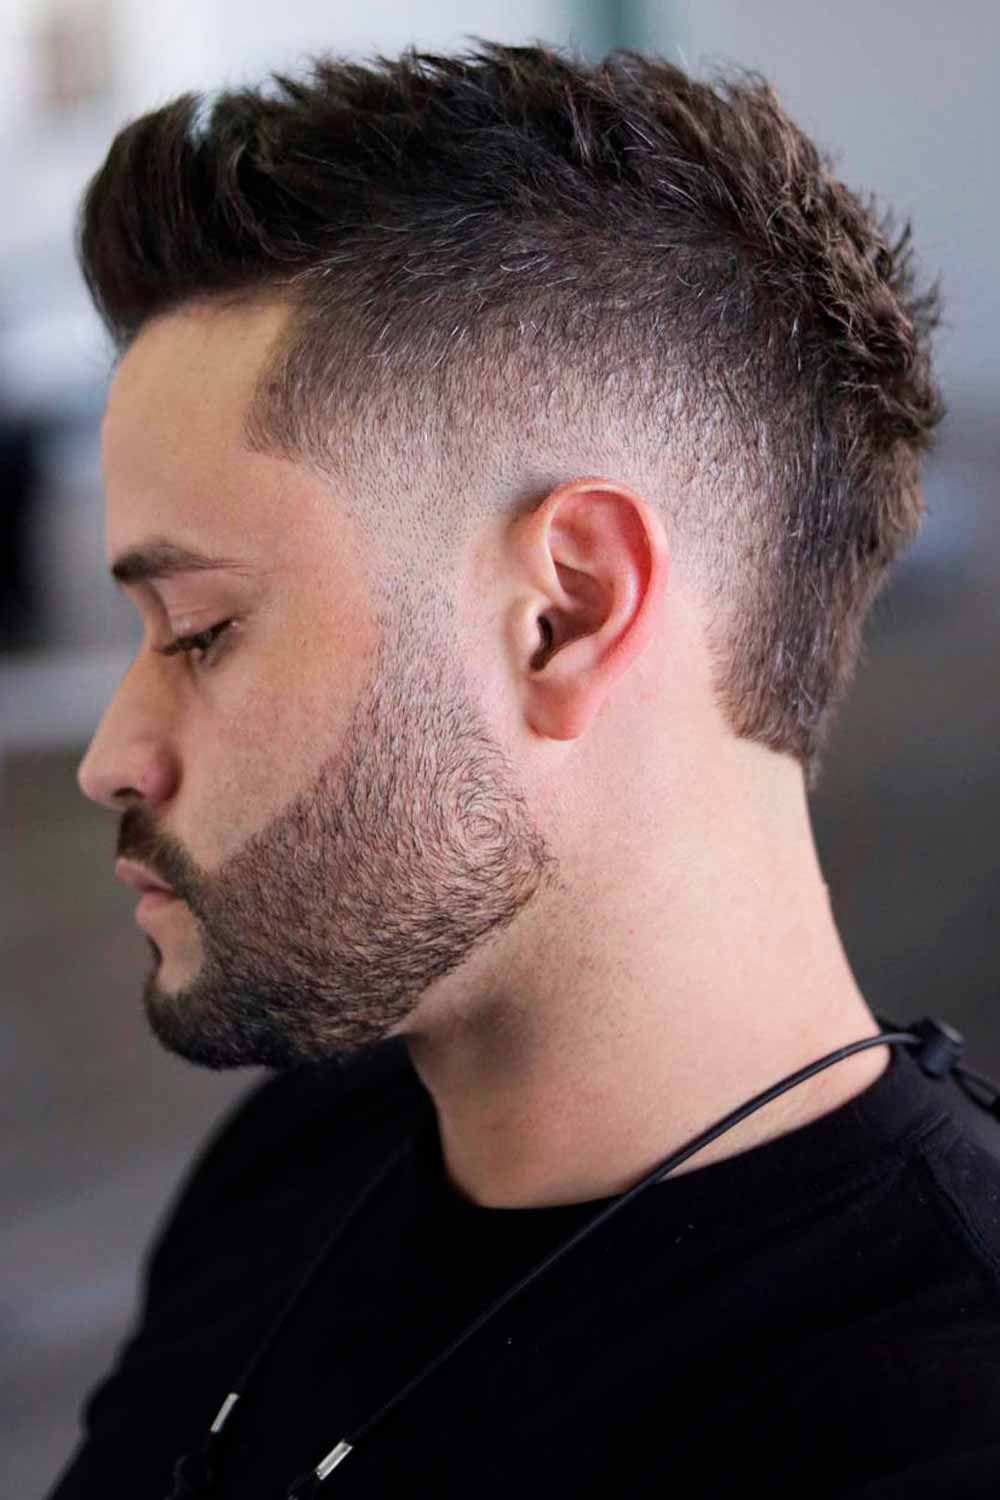 Mullet Fade #thickahirmen #haircutsformenwiththickhair #thickhairhaircuts